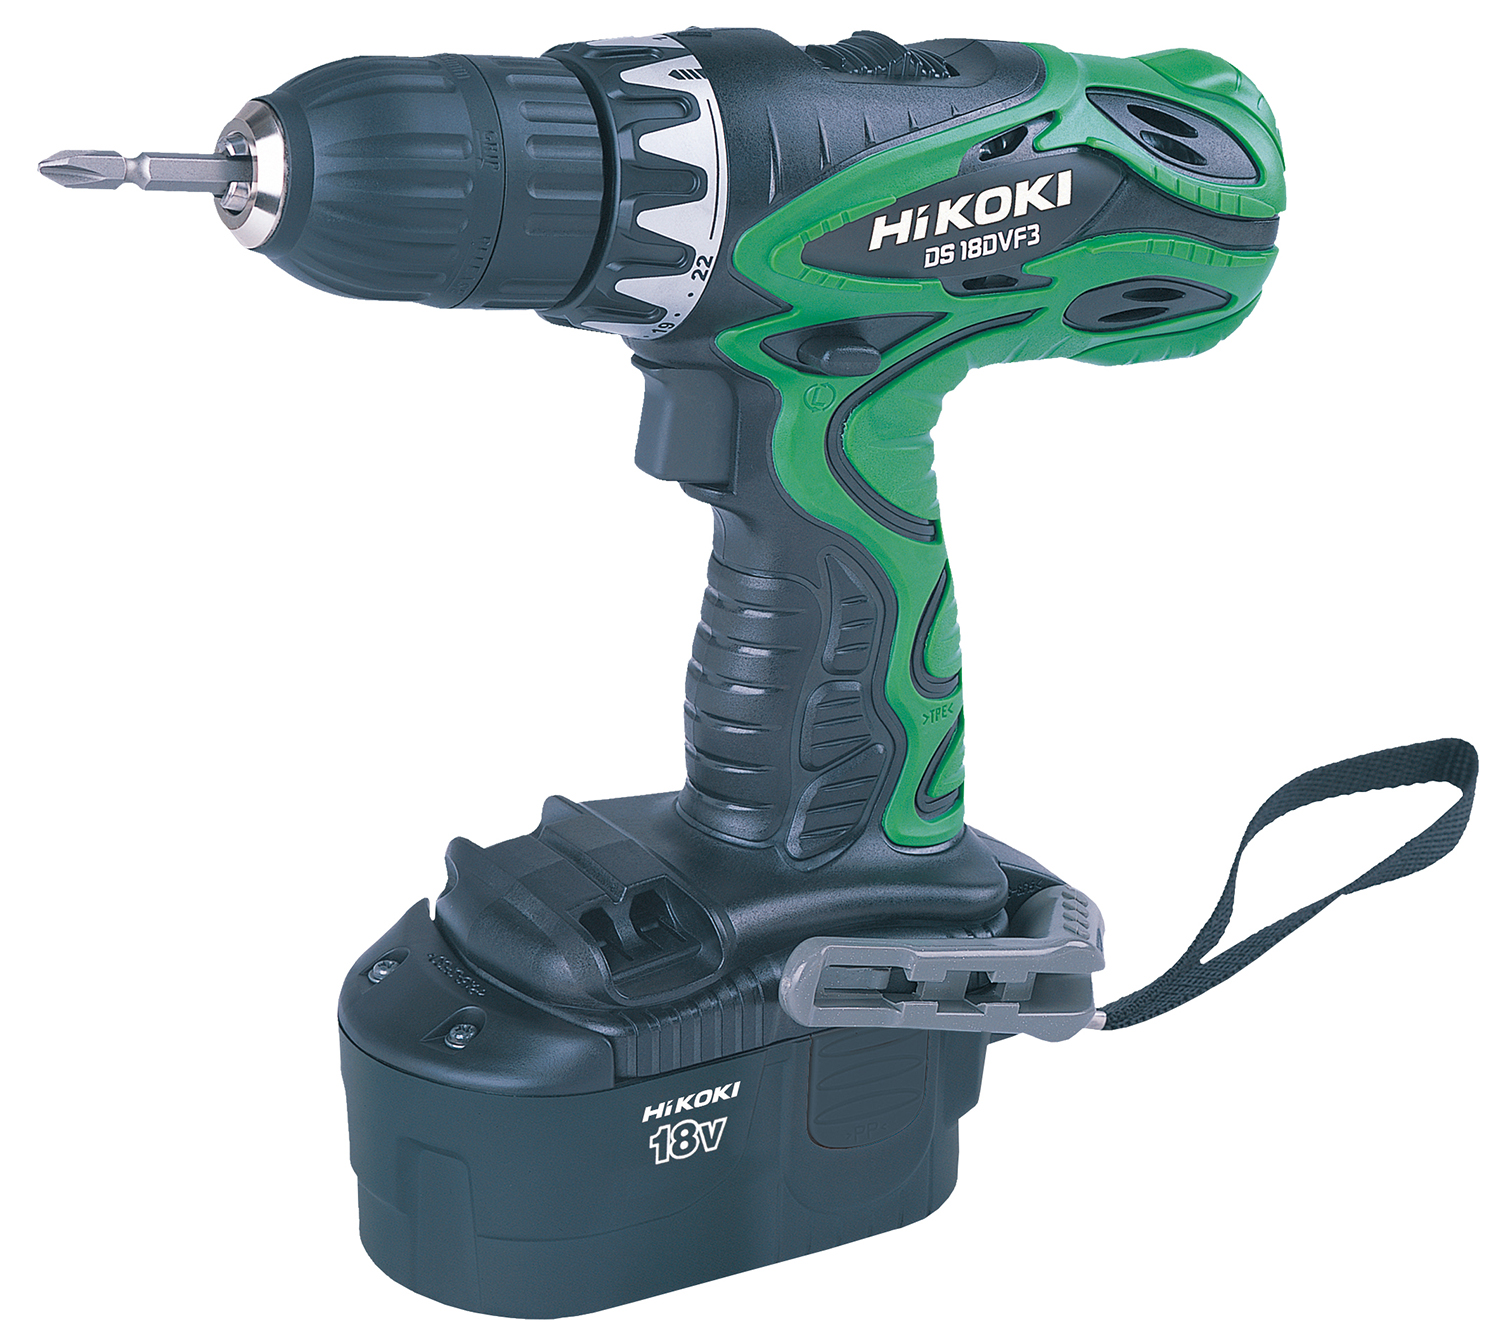 Cordless Driver Drill DS18DVF3